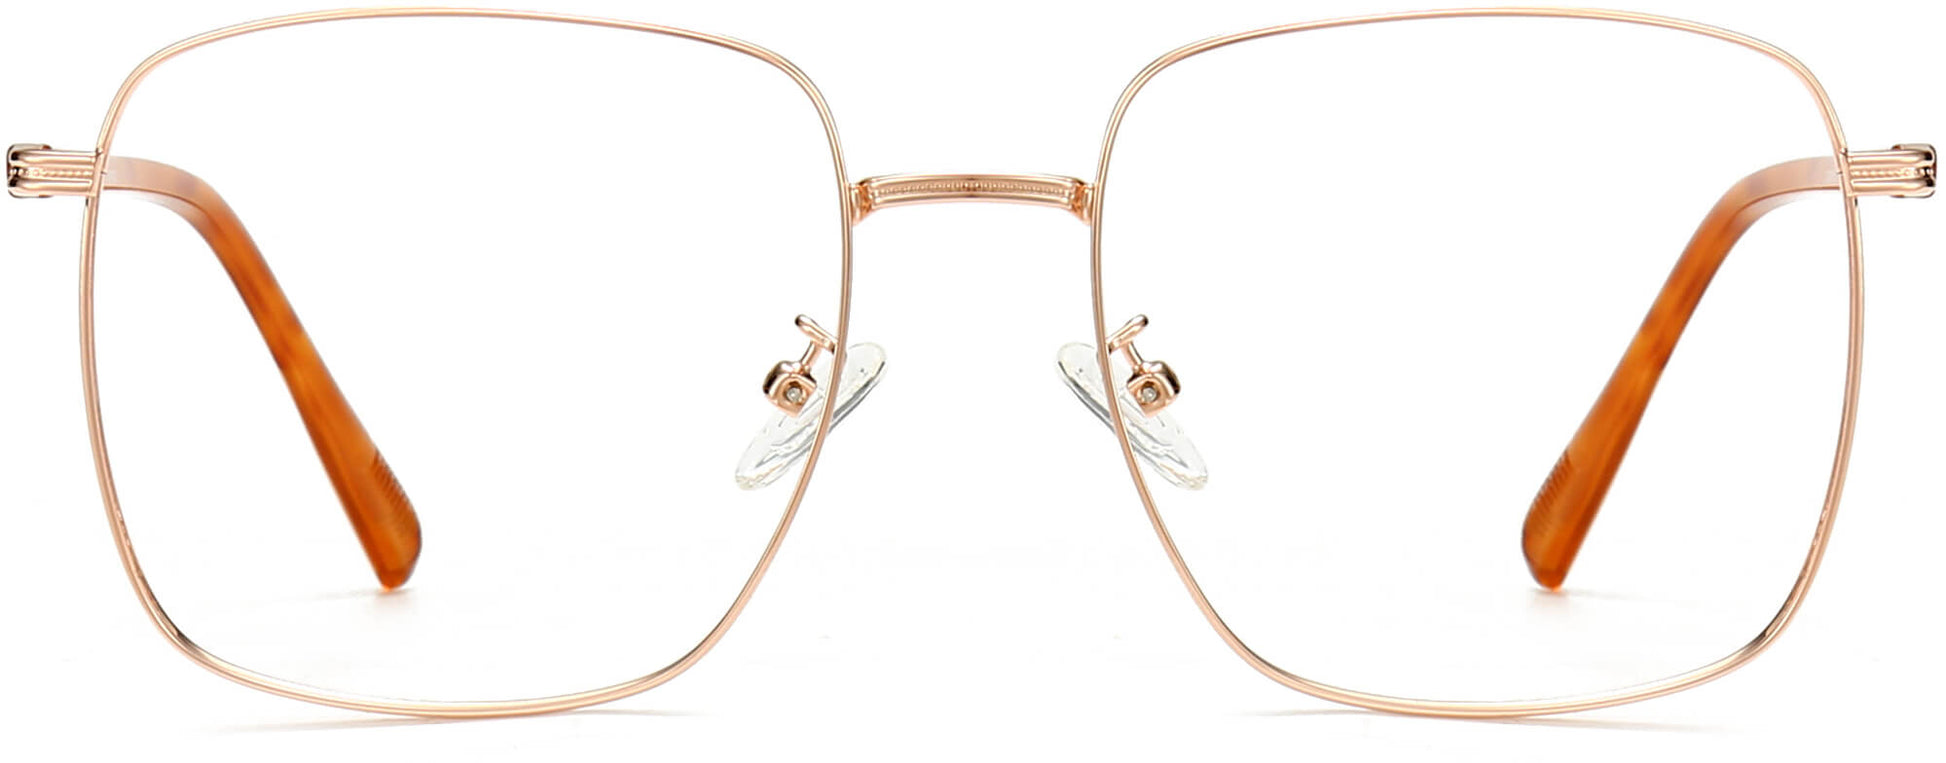 Cadence Square Gold Eyeglasses from ANRRI, front view